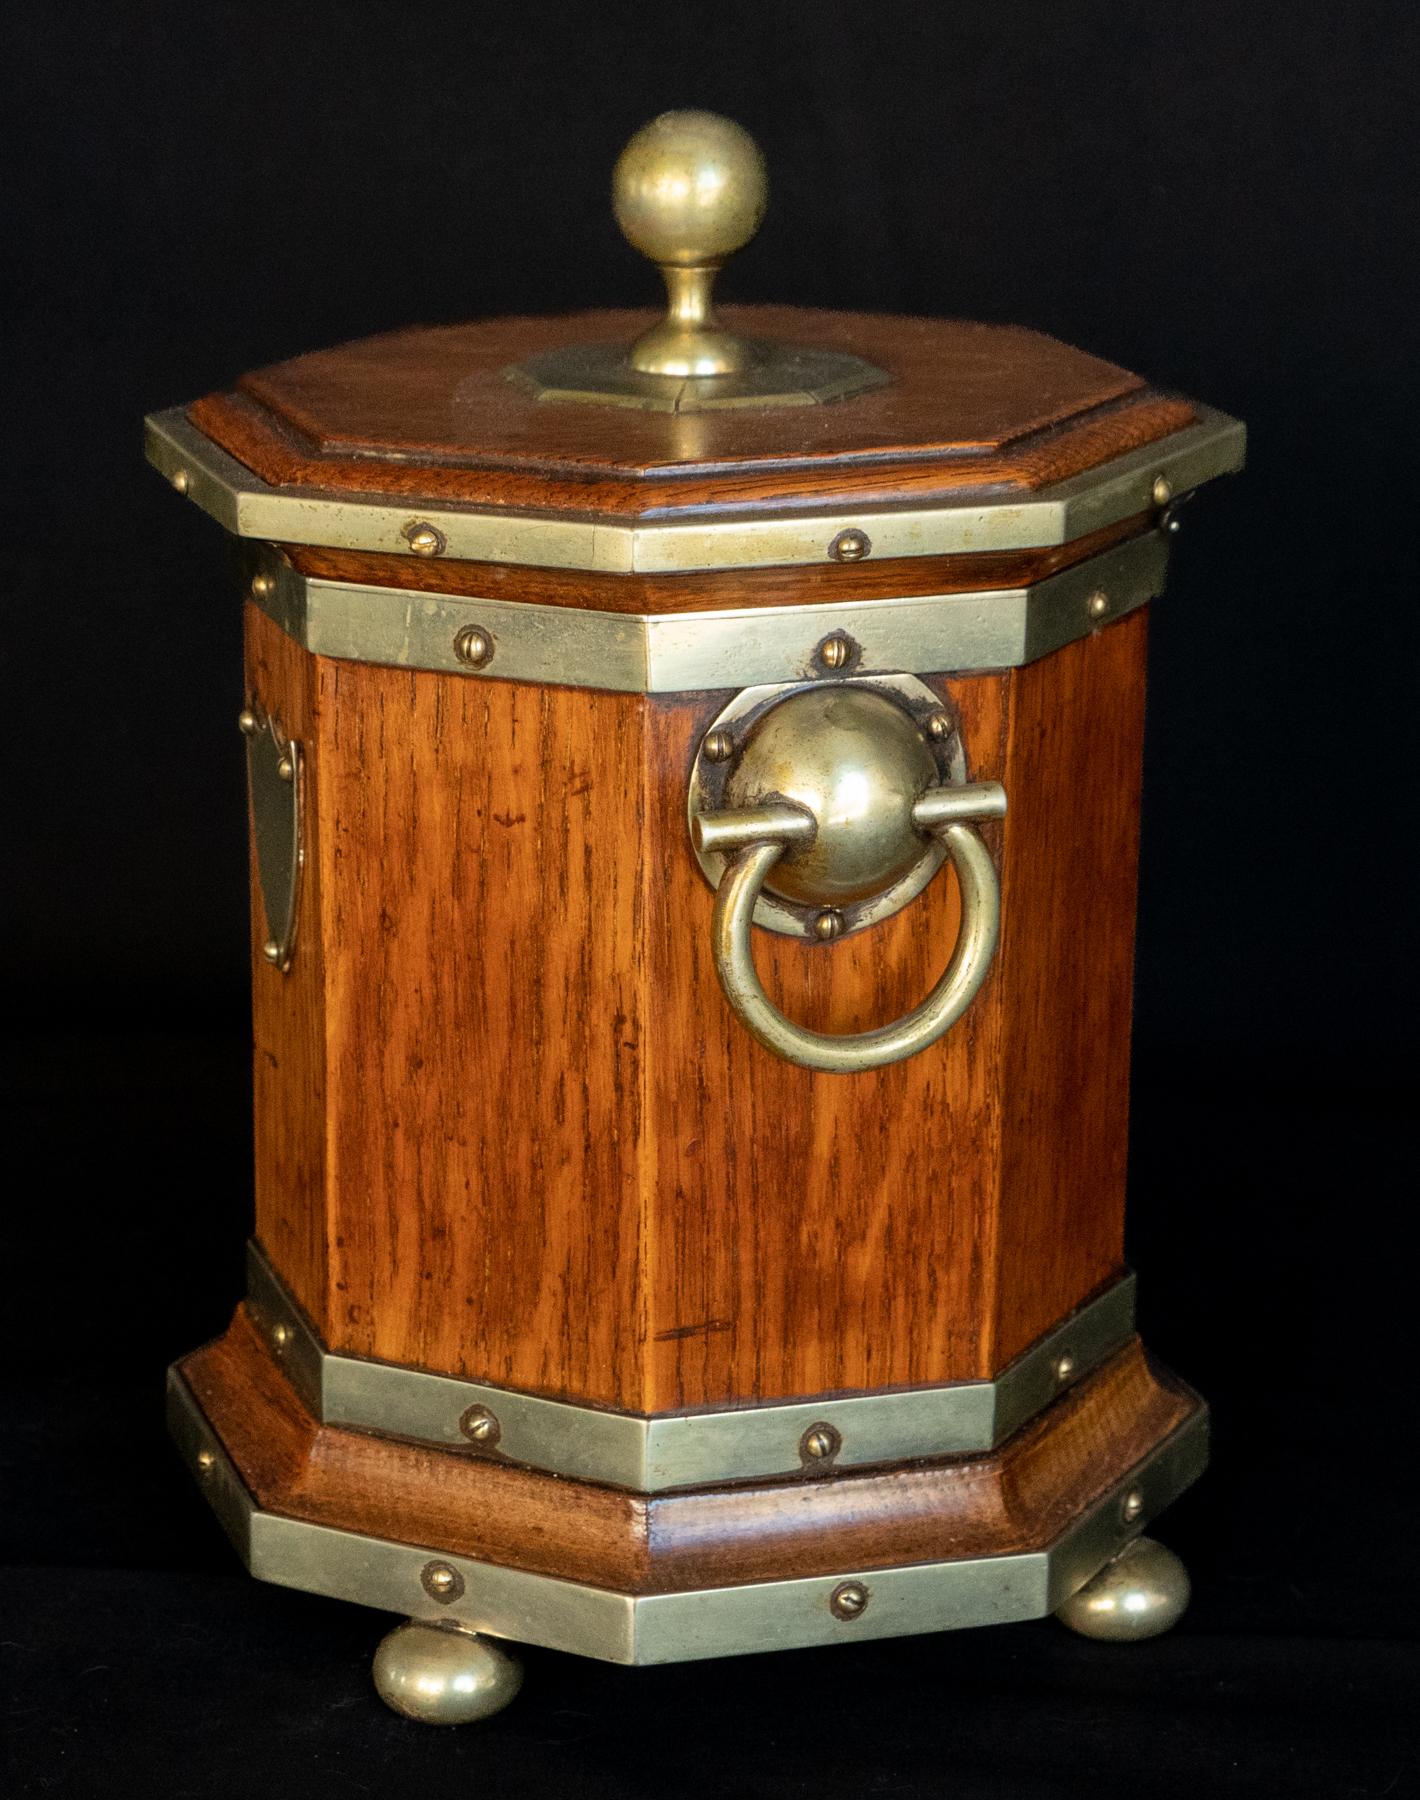 Late 19th century English Oak Octagonal Humidor With Silver Mounts. Complex octagonal form with moldings and silvered brass fittings. The base supported by small bun feet, two ring handles and a ball finial on the hinged top. The top is level and